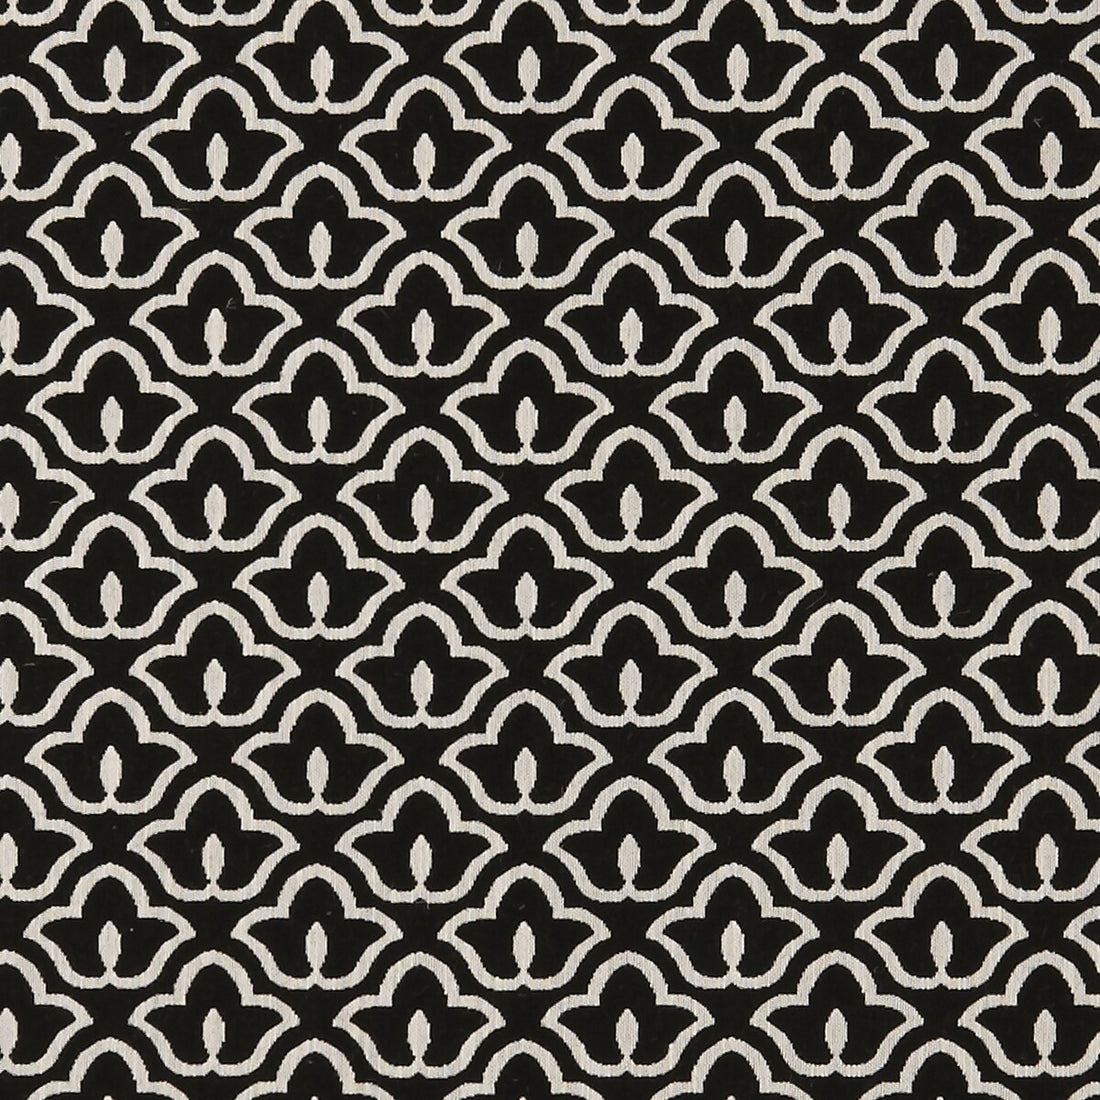 Bw1014 fabric in black/white color - pattern F0887/01.CAC.0 - by Clarke And Clarke in the Clarke &amp; Clarke Black + White collection